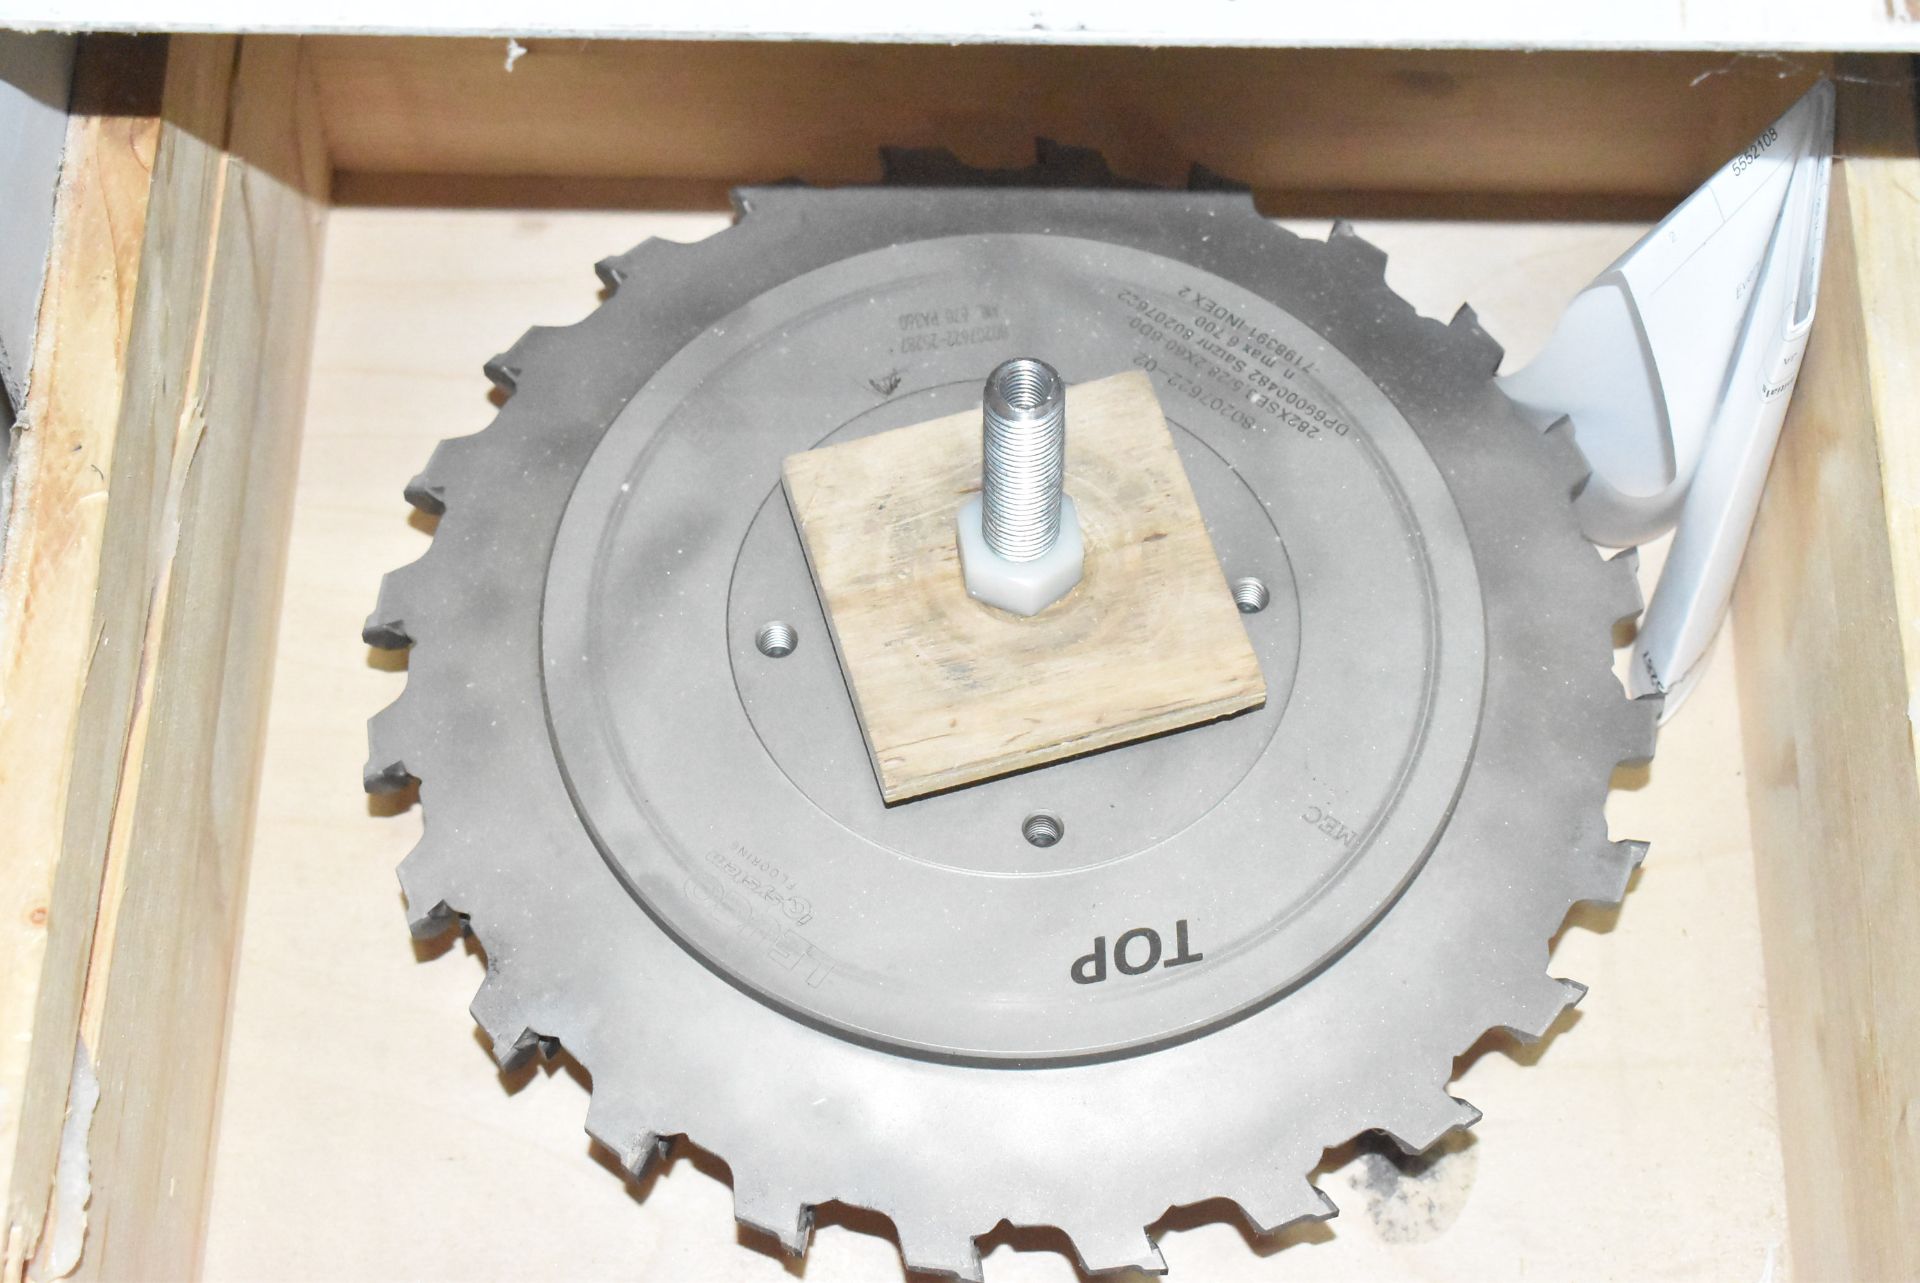 LOT/ HOMAG DOUBLE END TENONER TOOLING [RIGGING FEE FOR LOT #182 - $300 USD PLUS APPLICABLE FEES] - Image 12 of 14